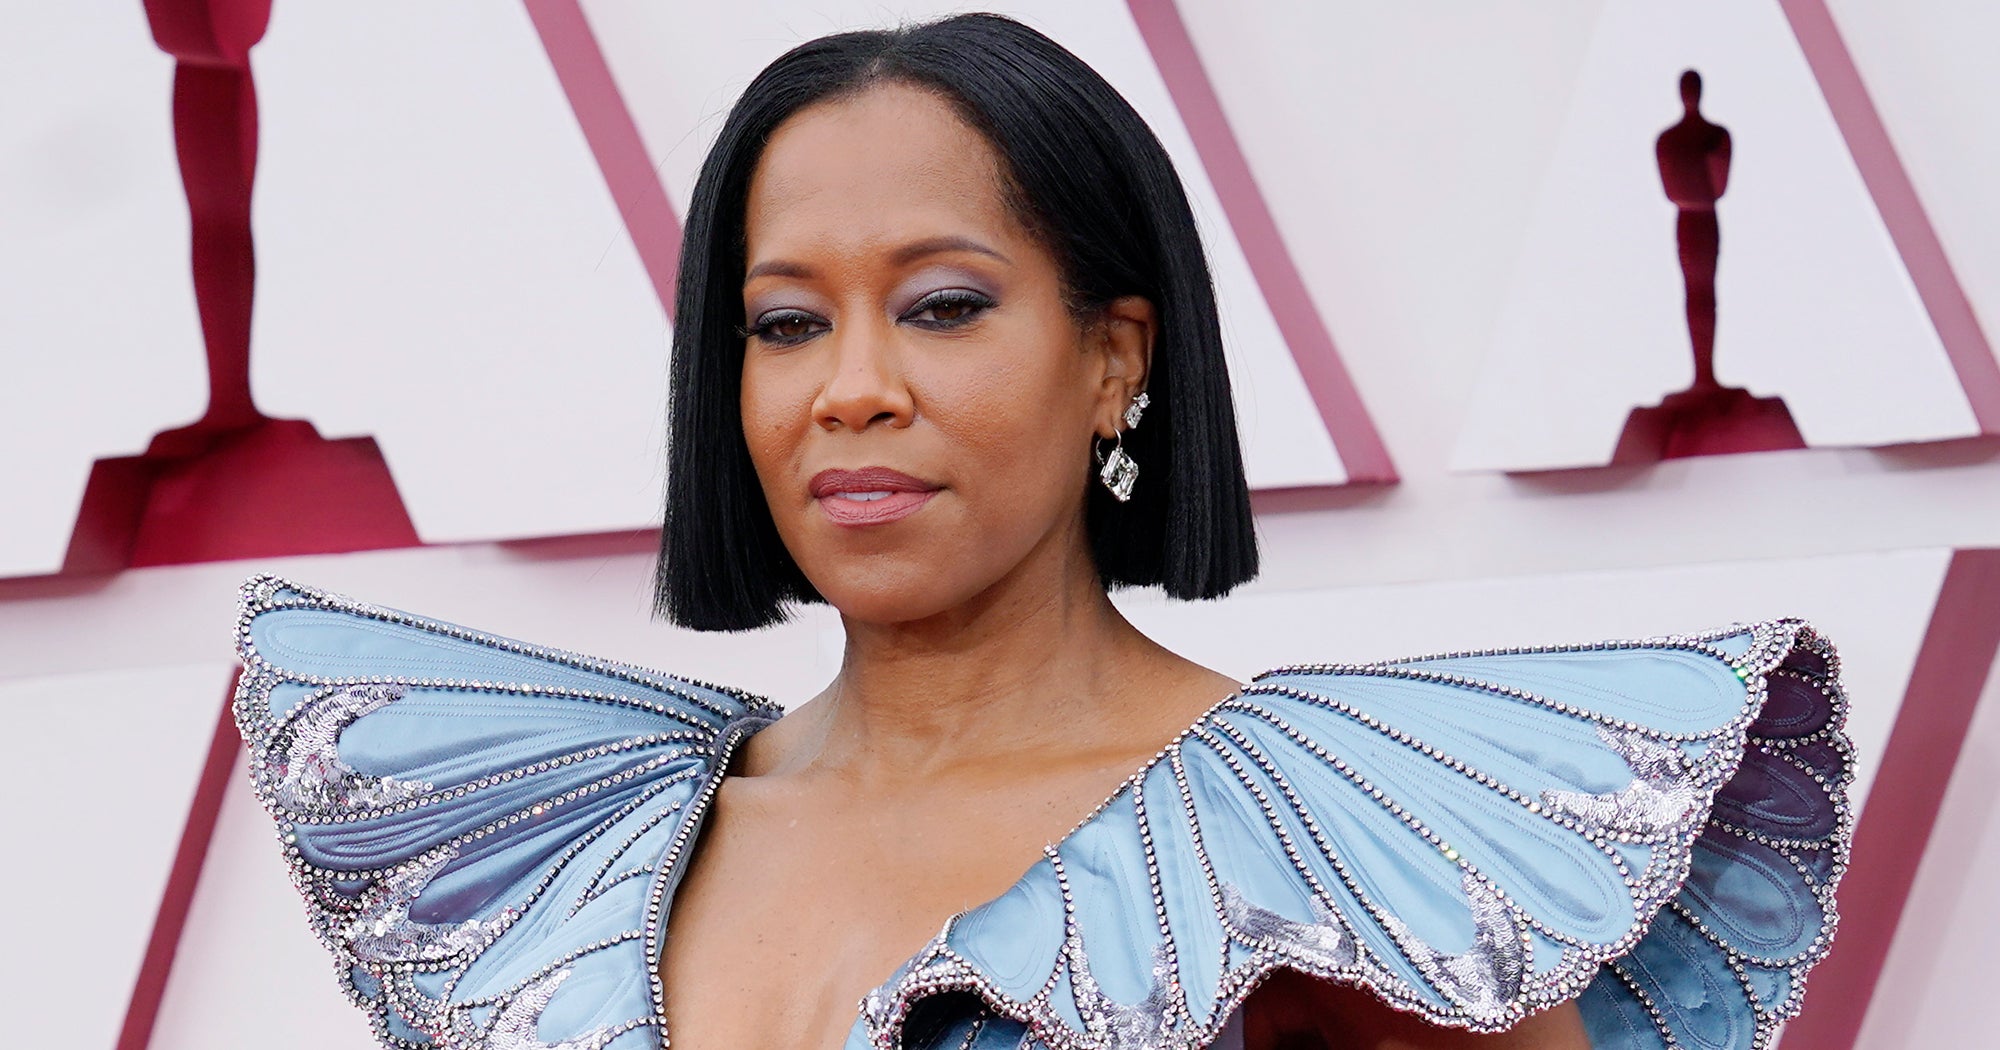 Every Winning Fashion Moment From The Live 2021 Oscars Red Carpet